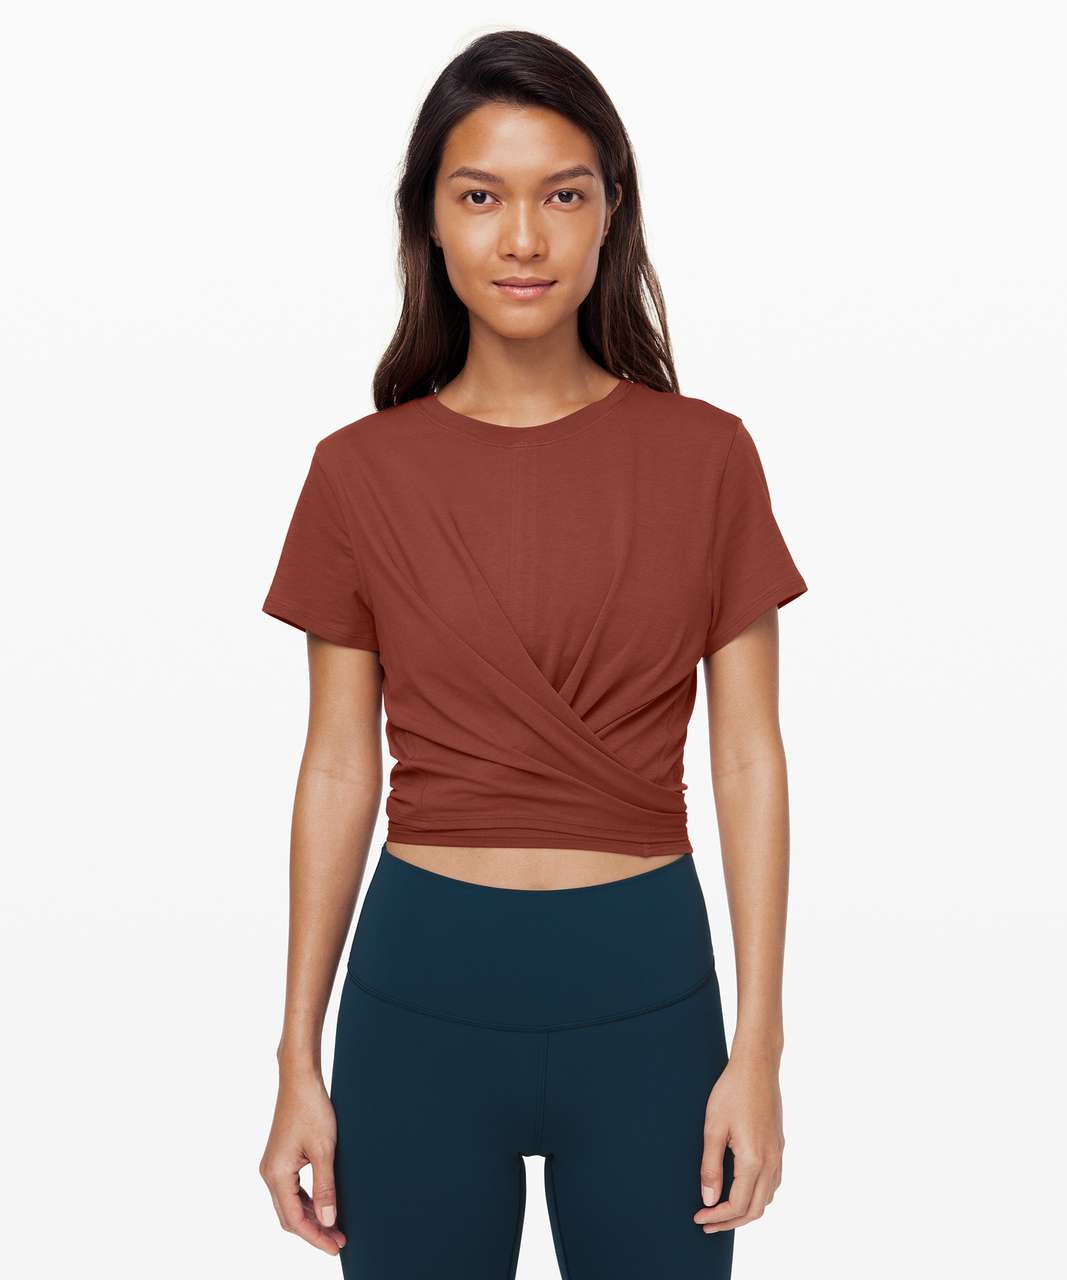 Lululemon Time To Restore Short Sleeve - Rustic Clay